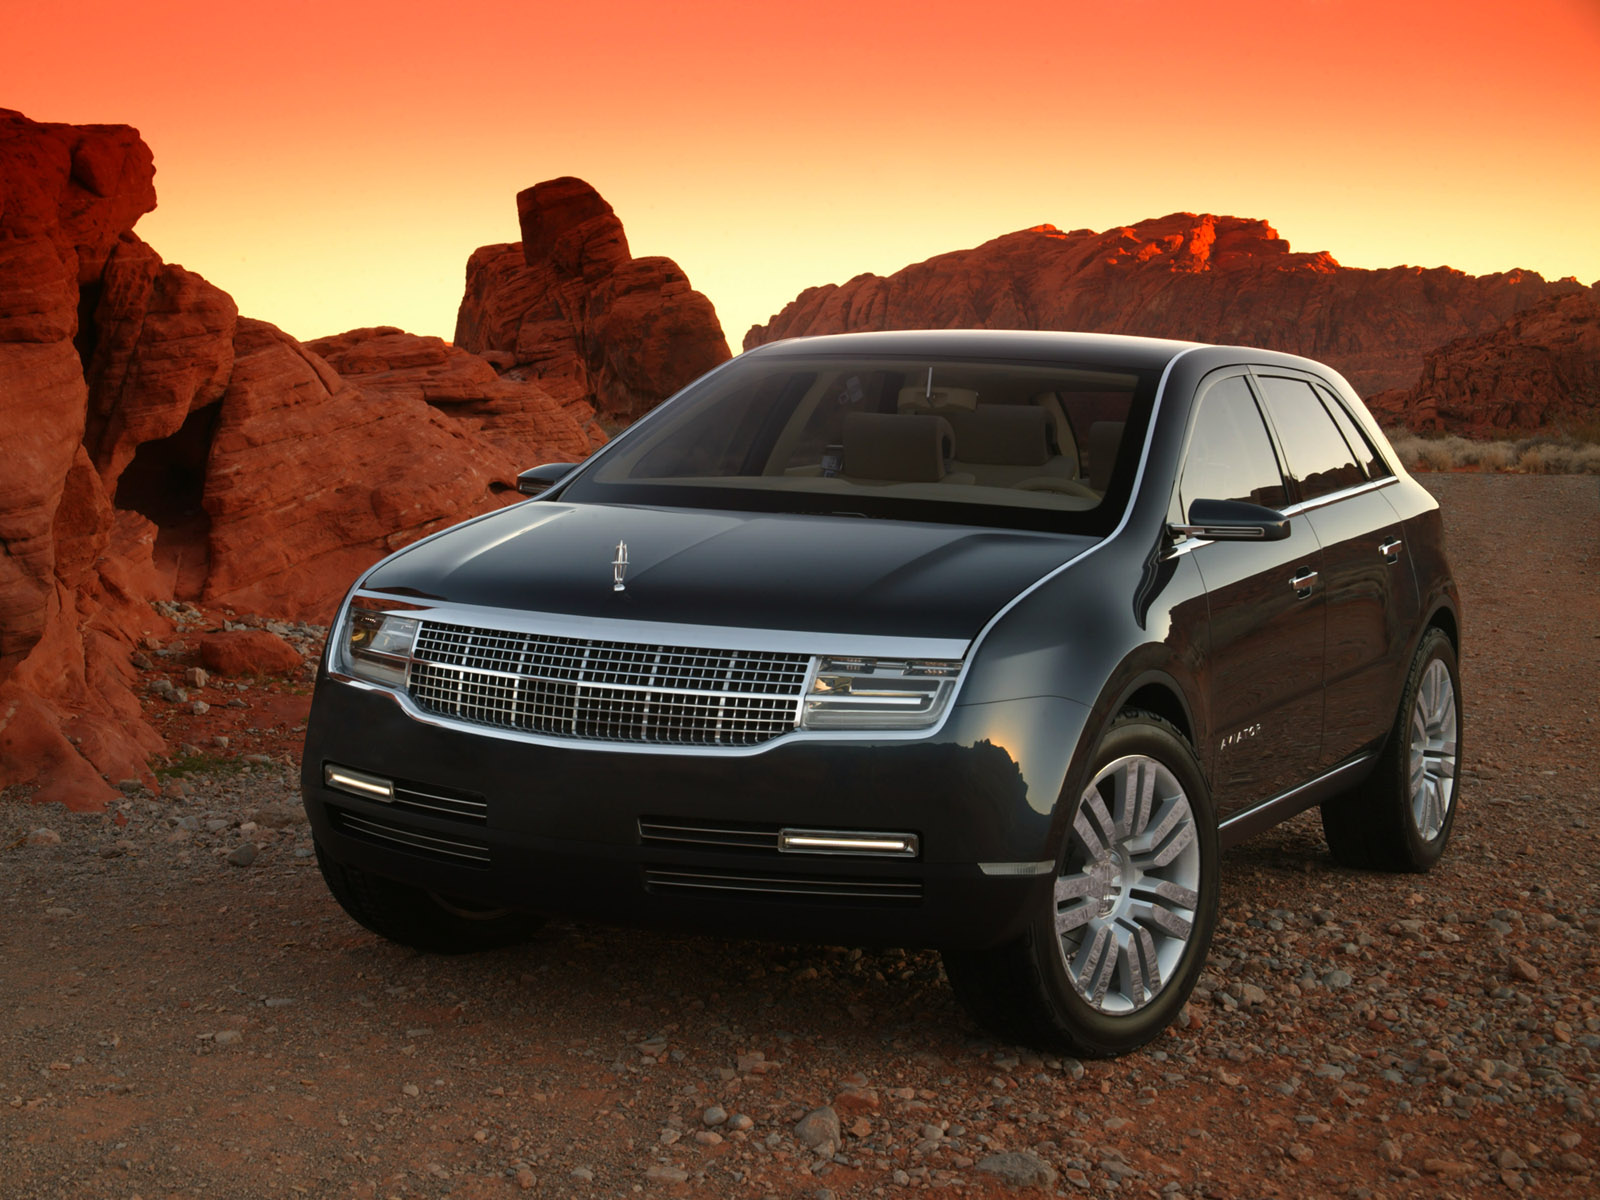 Vehicles 2008 Lincoln MKX HD Wallpaper | Background Image